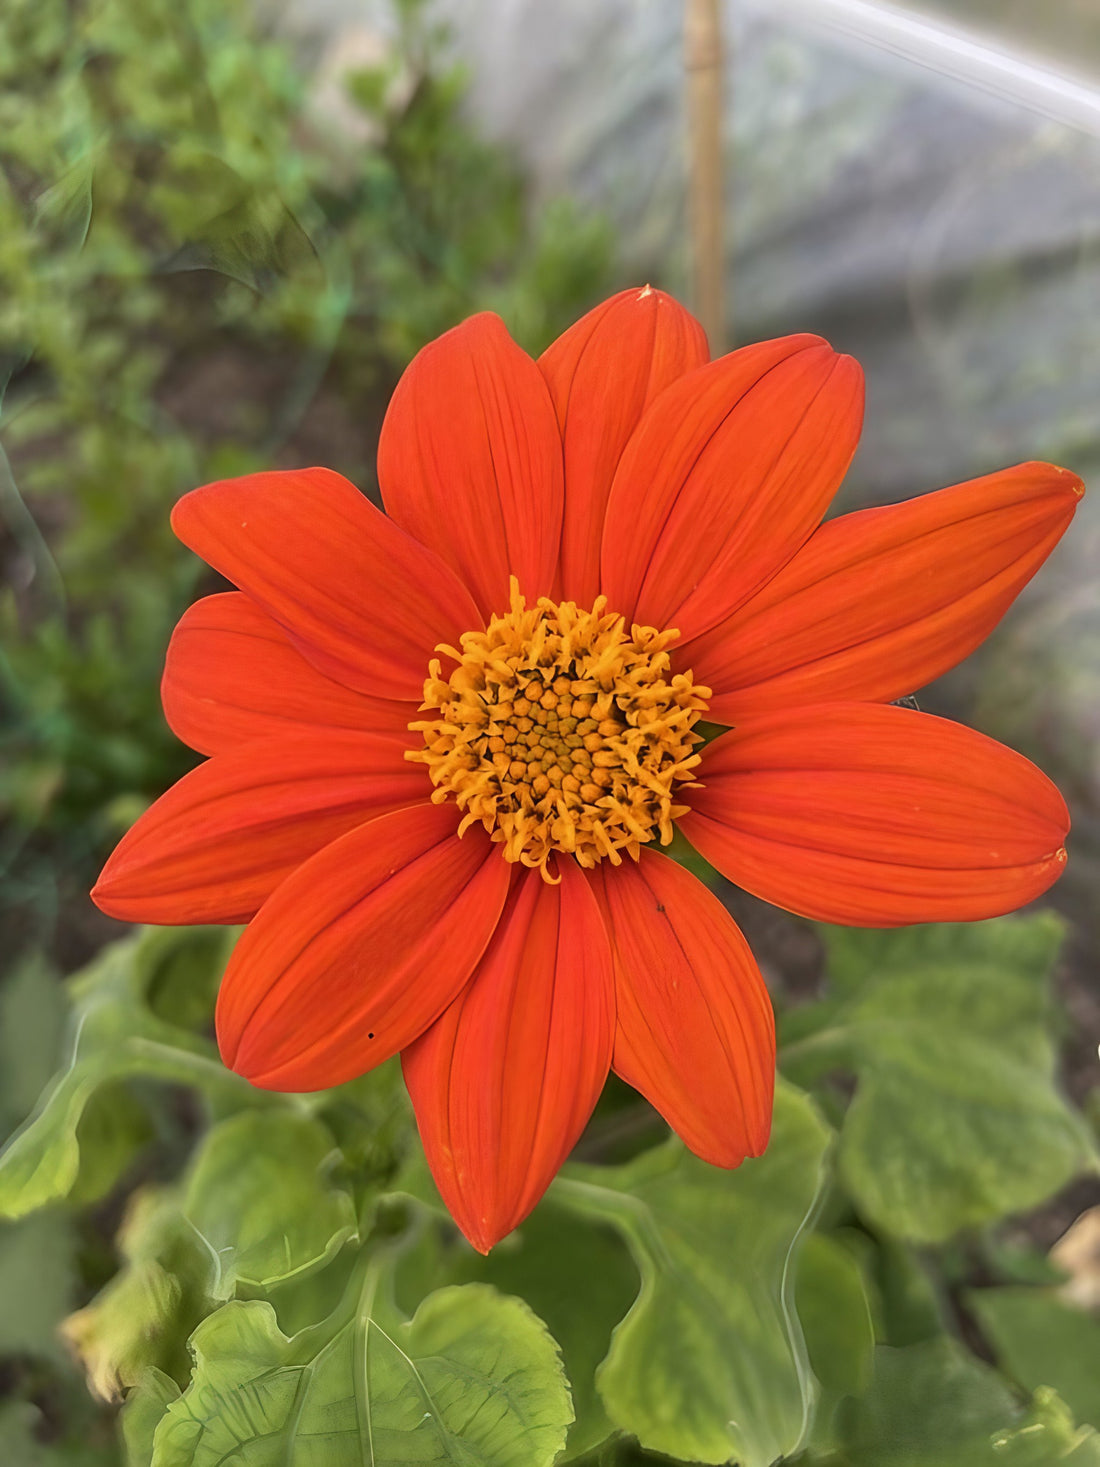 Tithonia Goldfinger flower showcasing its bright orange petals and yellow center